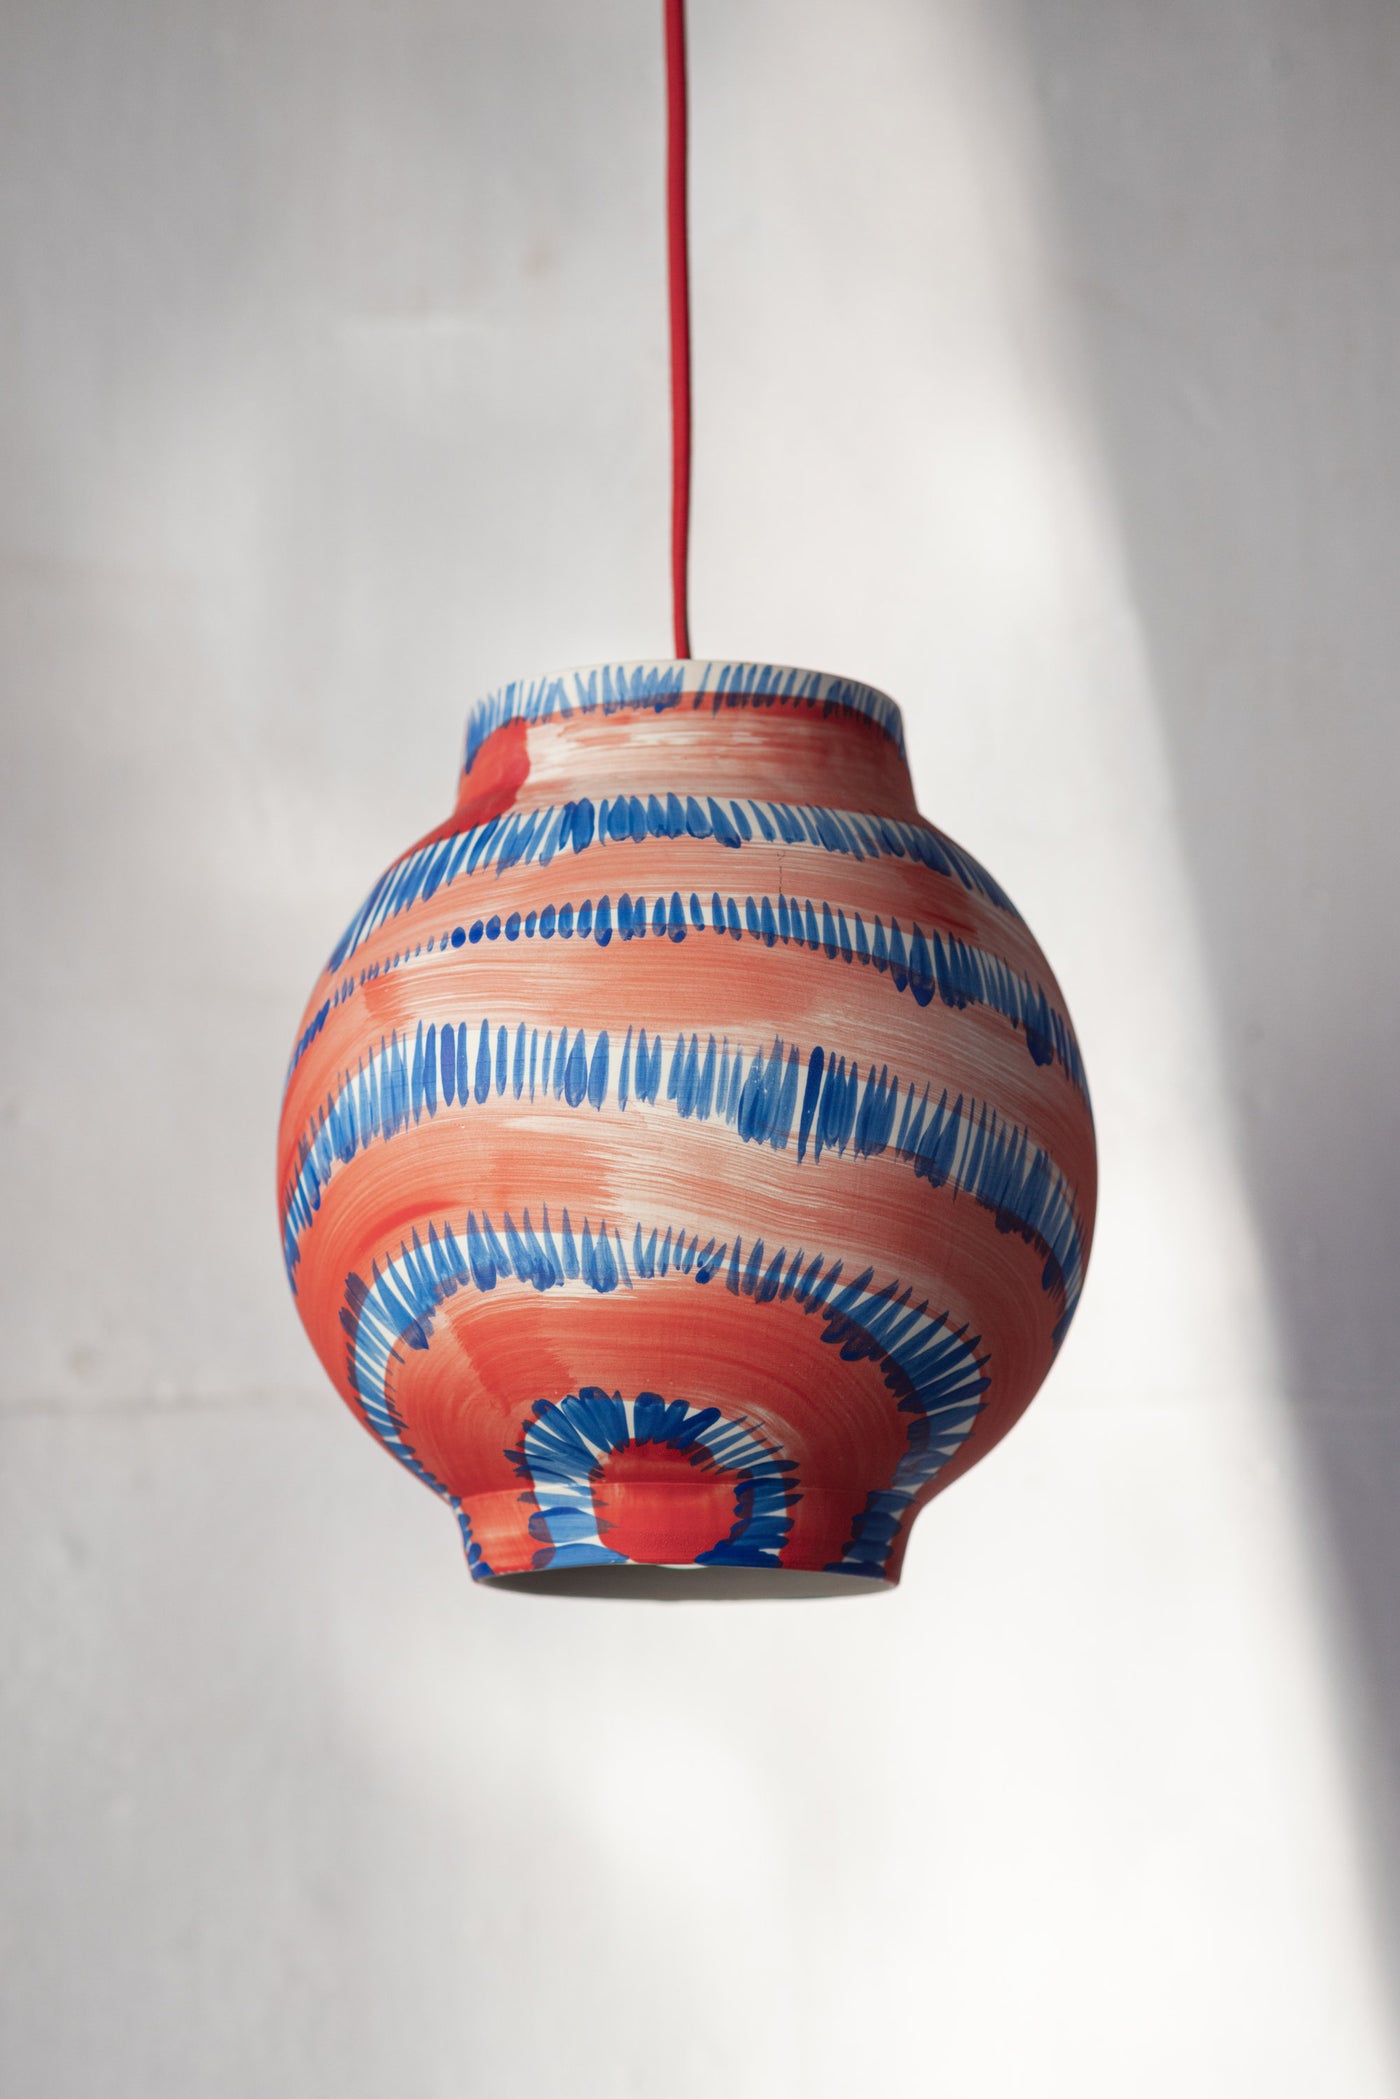 Porcelain Moon Lamp - Red and Blue